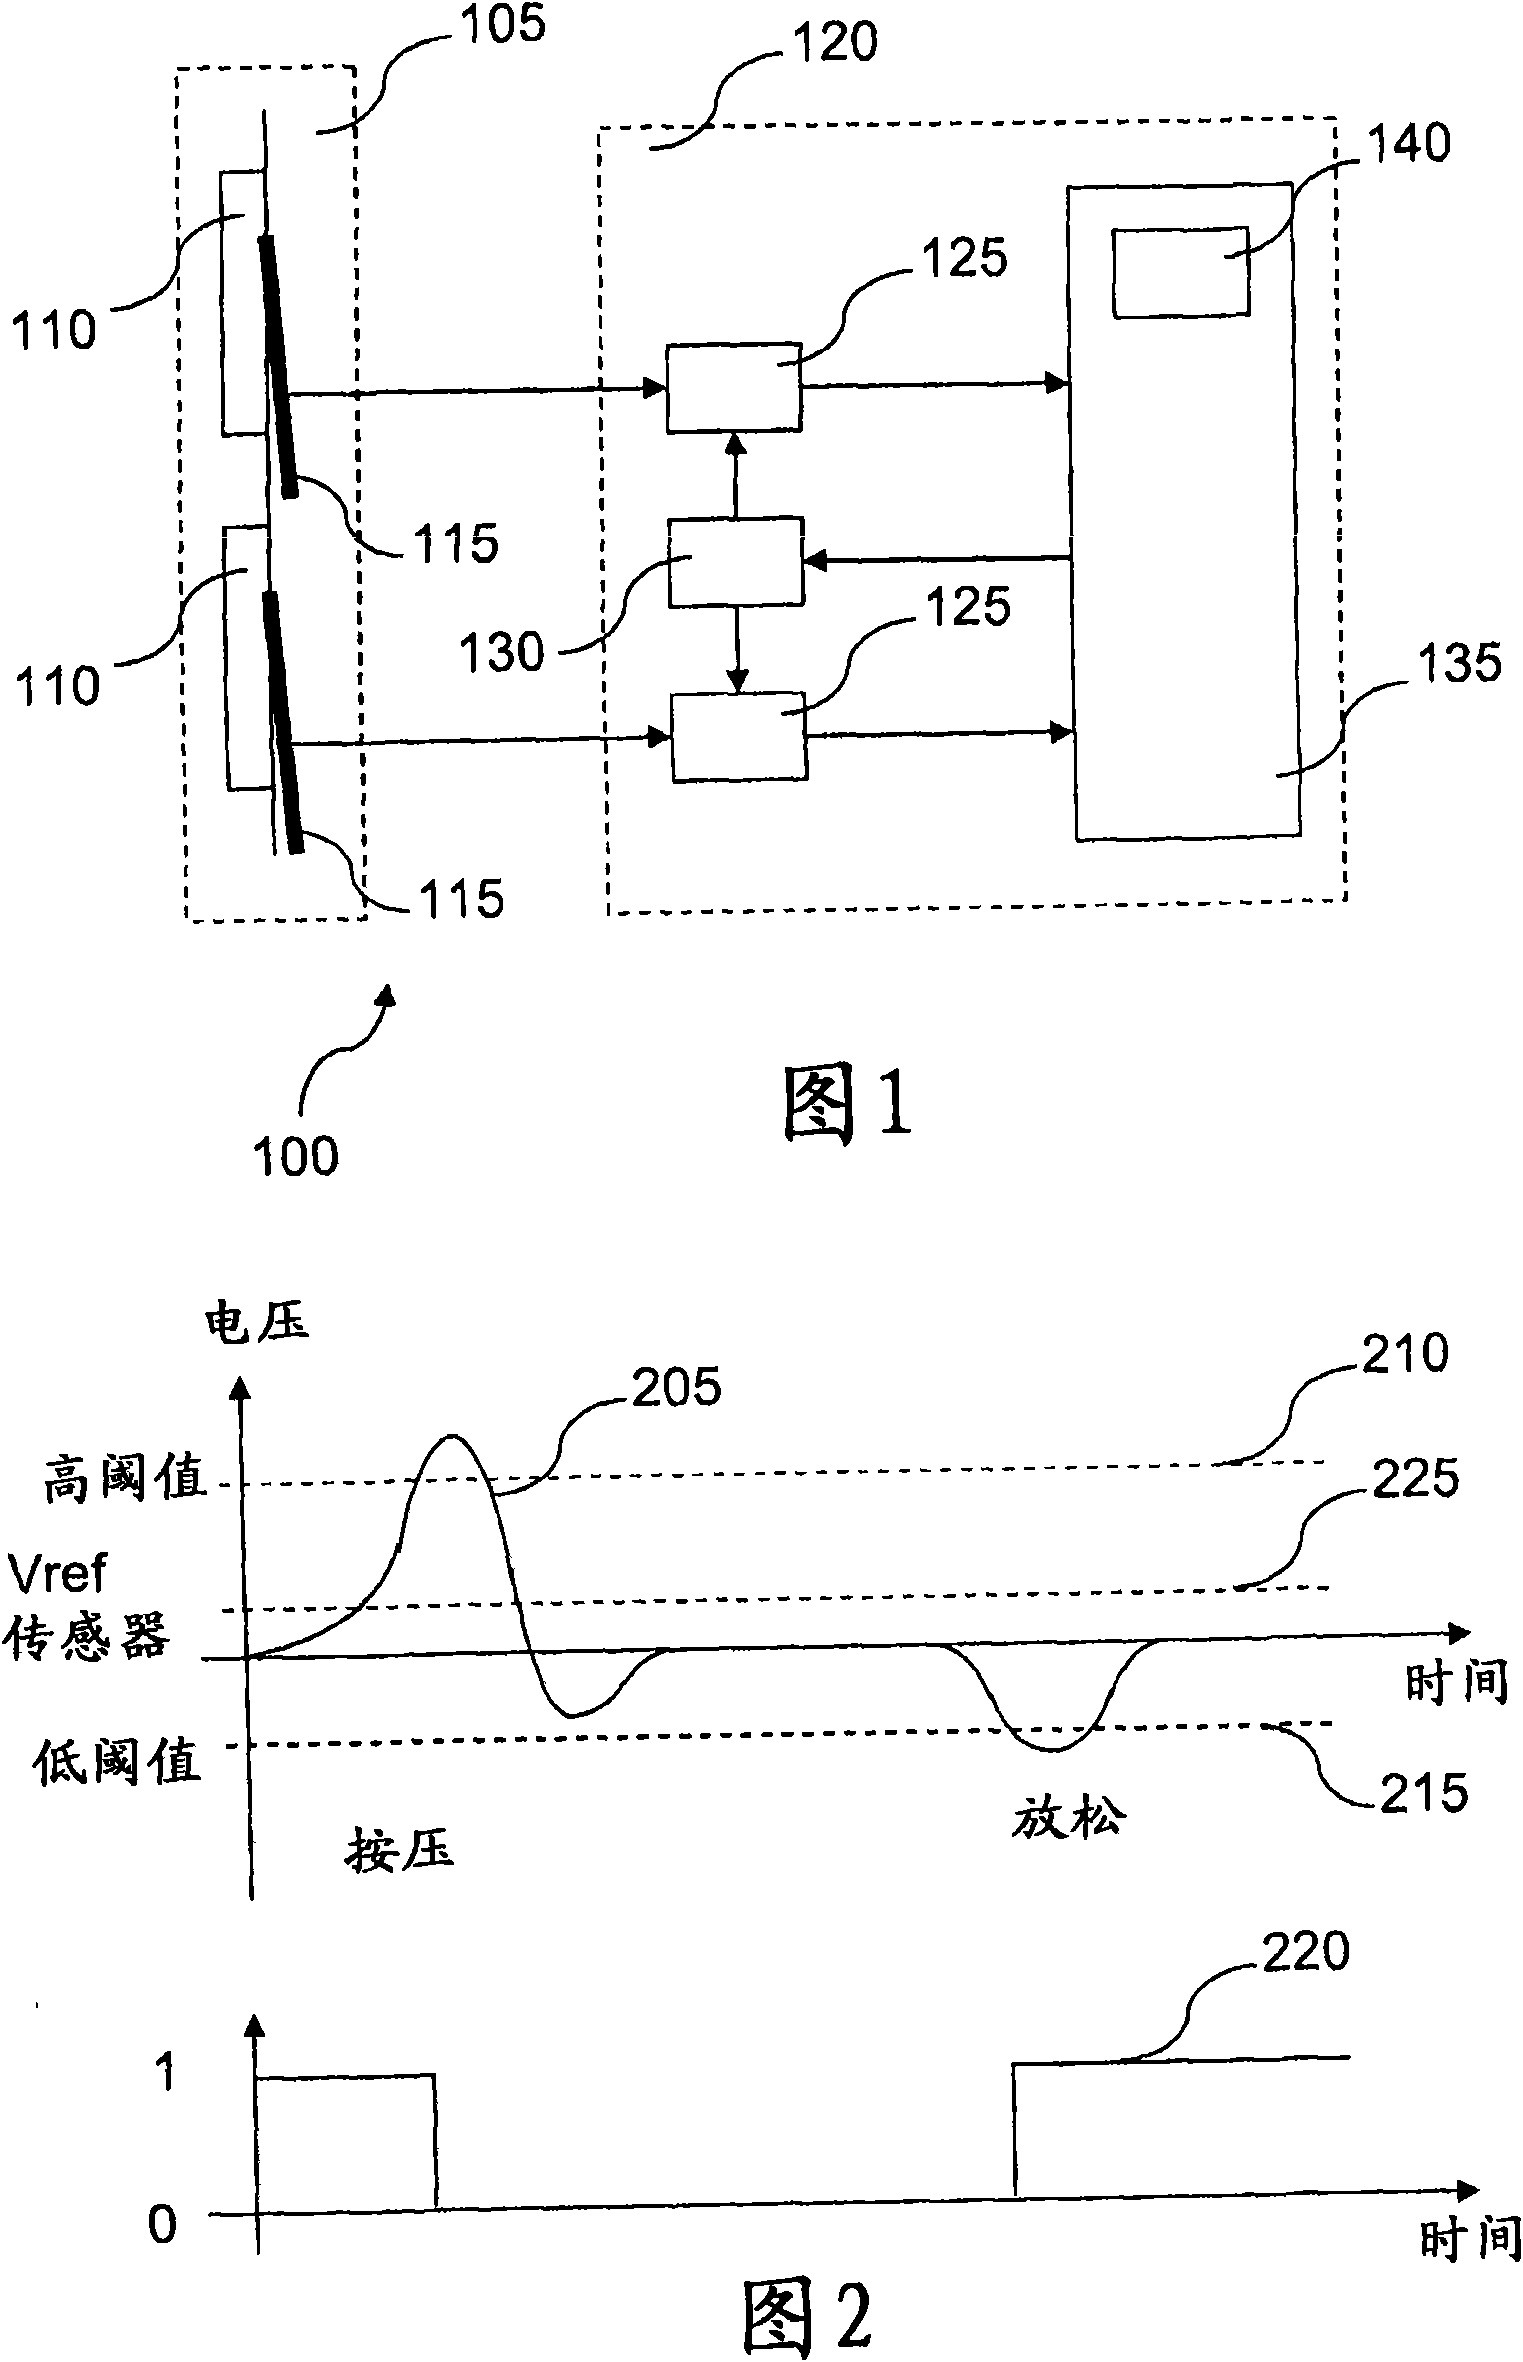 Touch-sensitive interface device and method